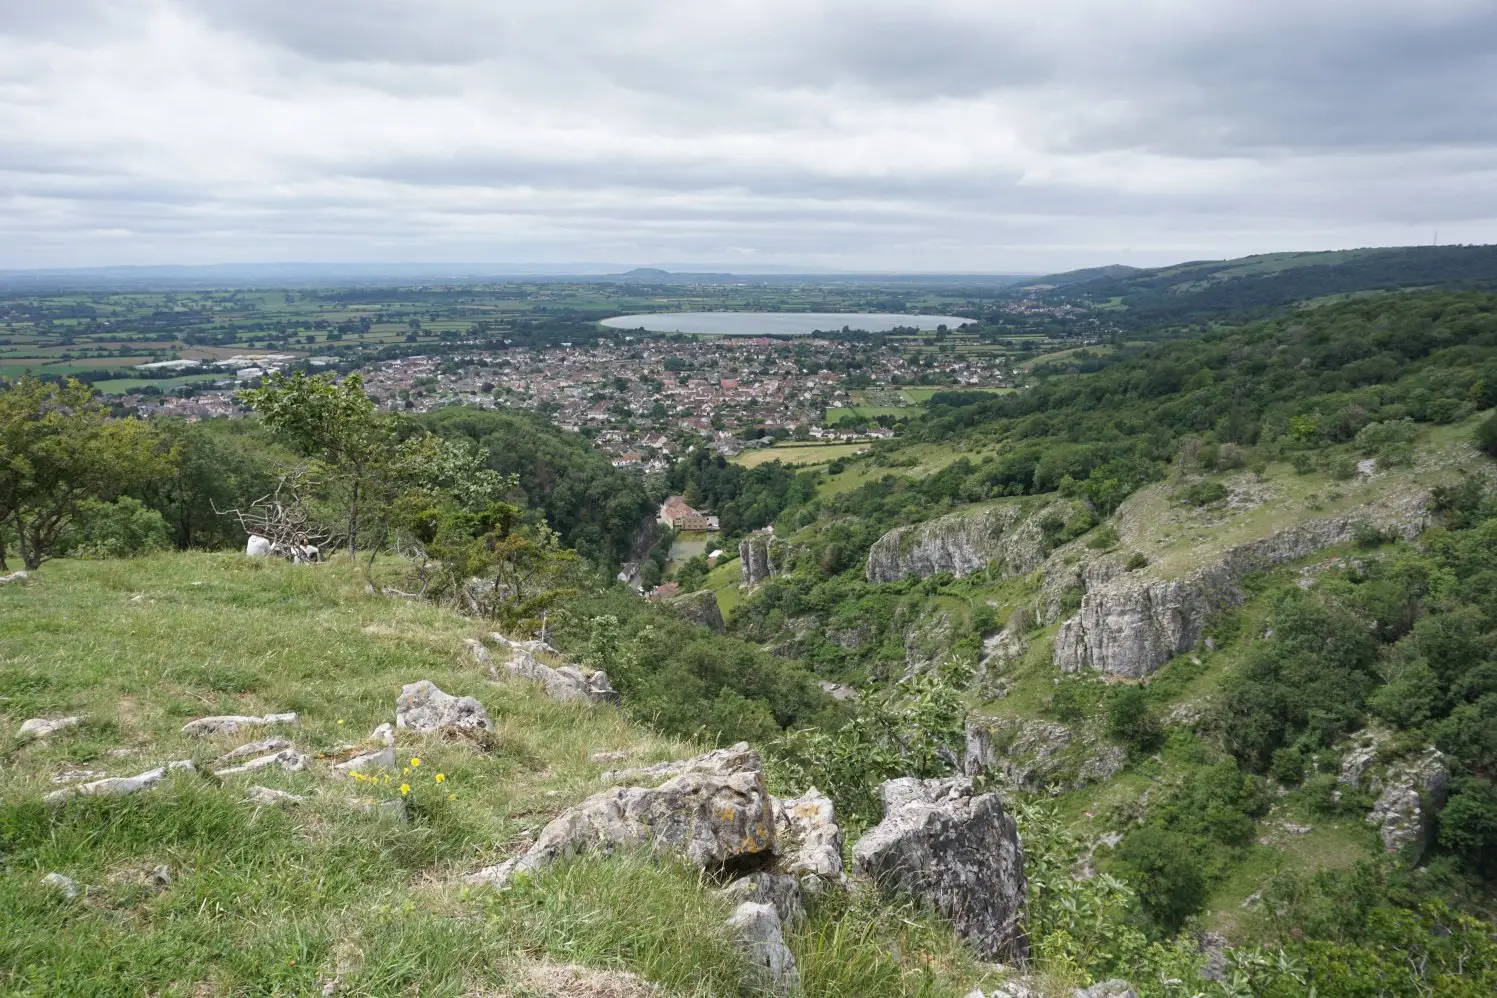 The cliffs of Cheddar Gorge and the spectacular views of the village of Cheddar and the Somerset Levels